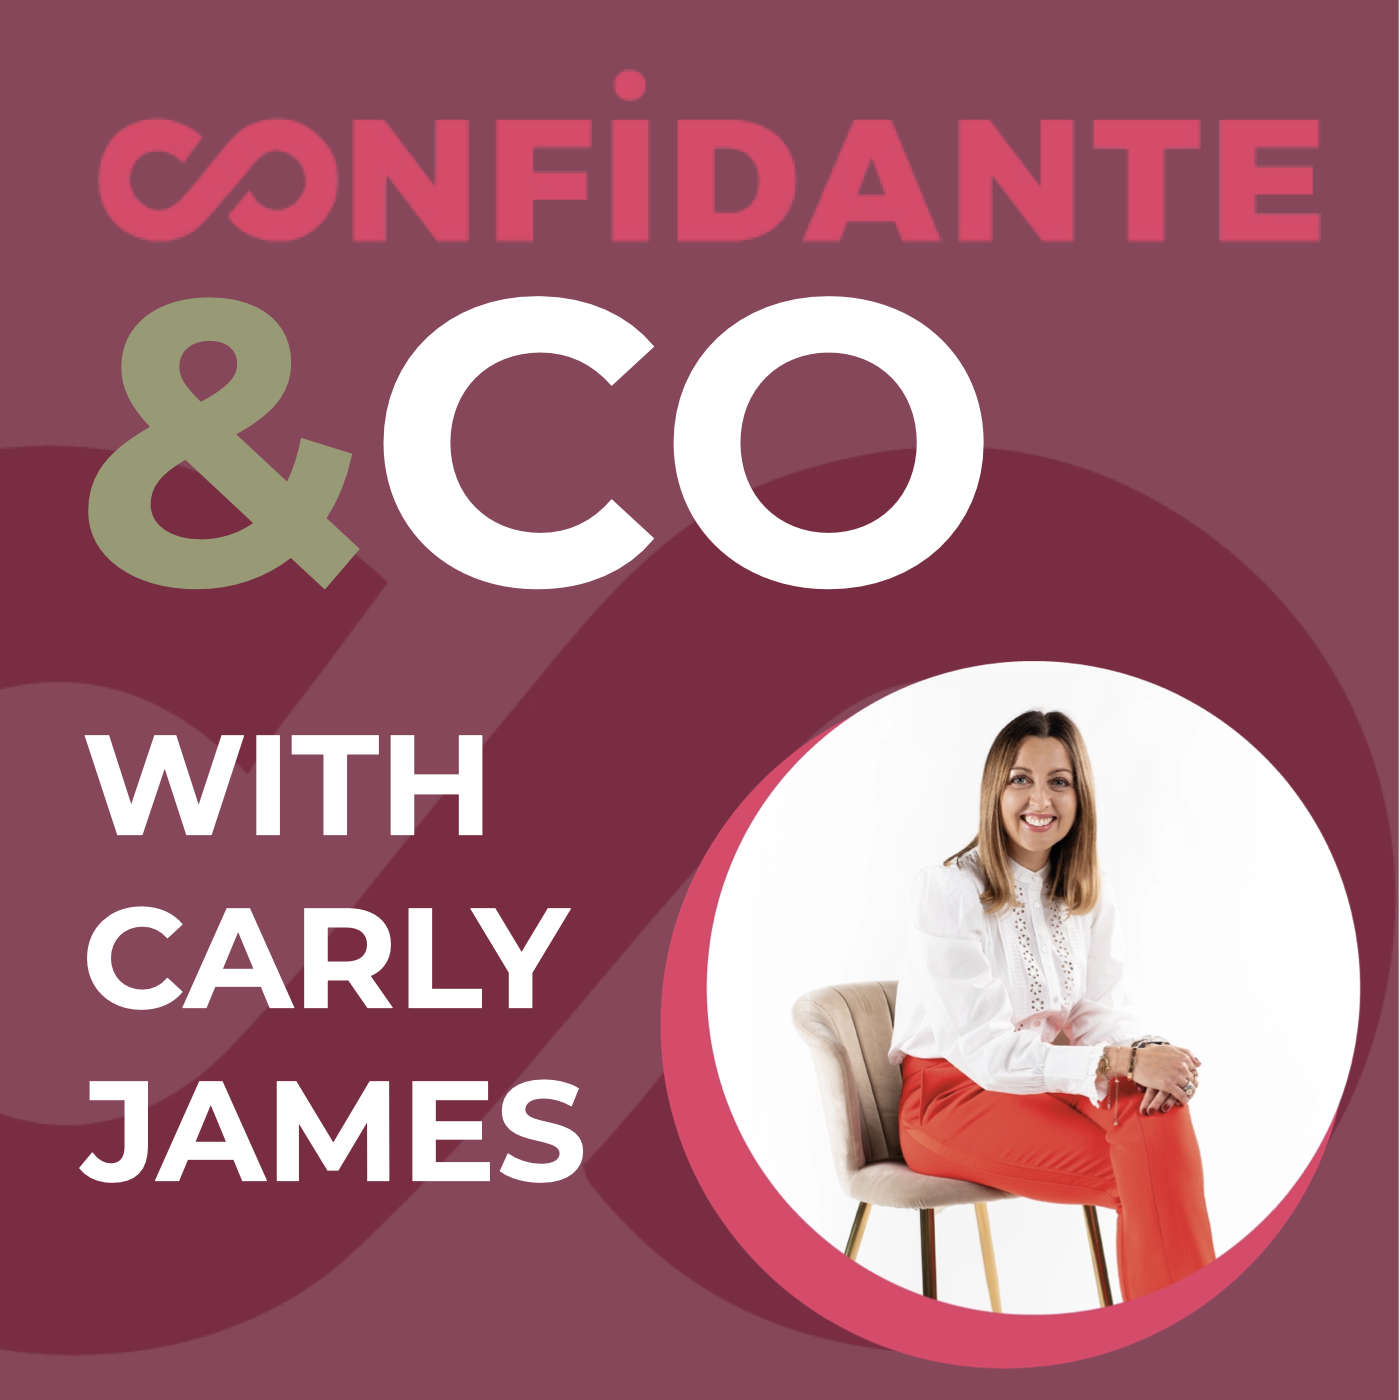 Confidante and Co - How To Tailor Your Separation/Divorce To Make It A More Positive Experience